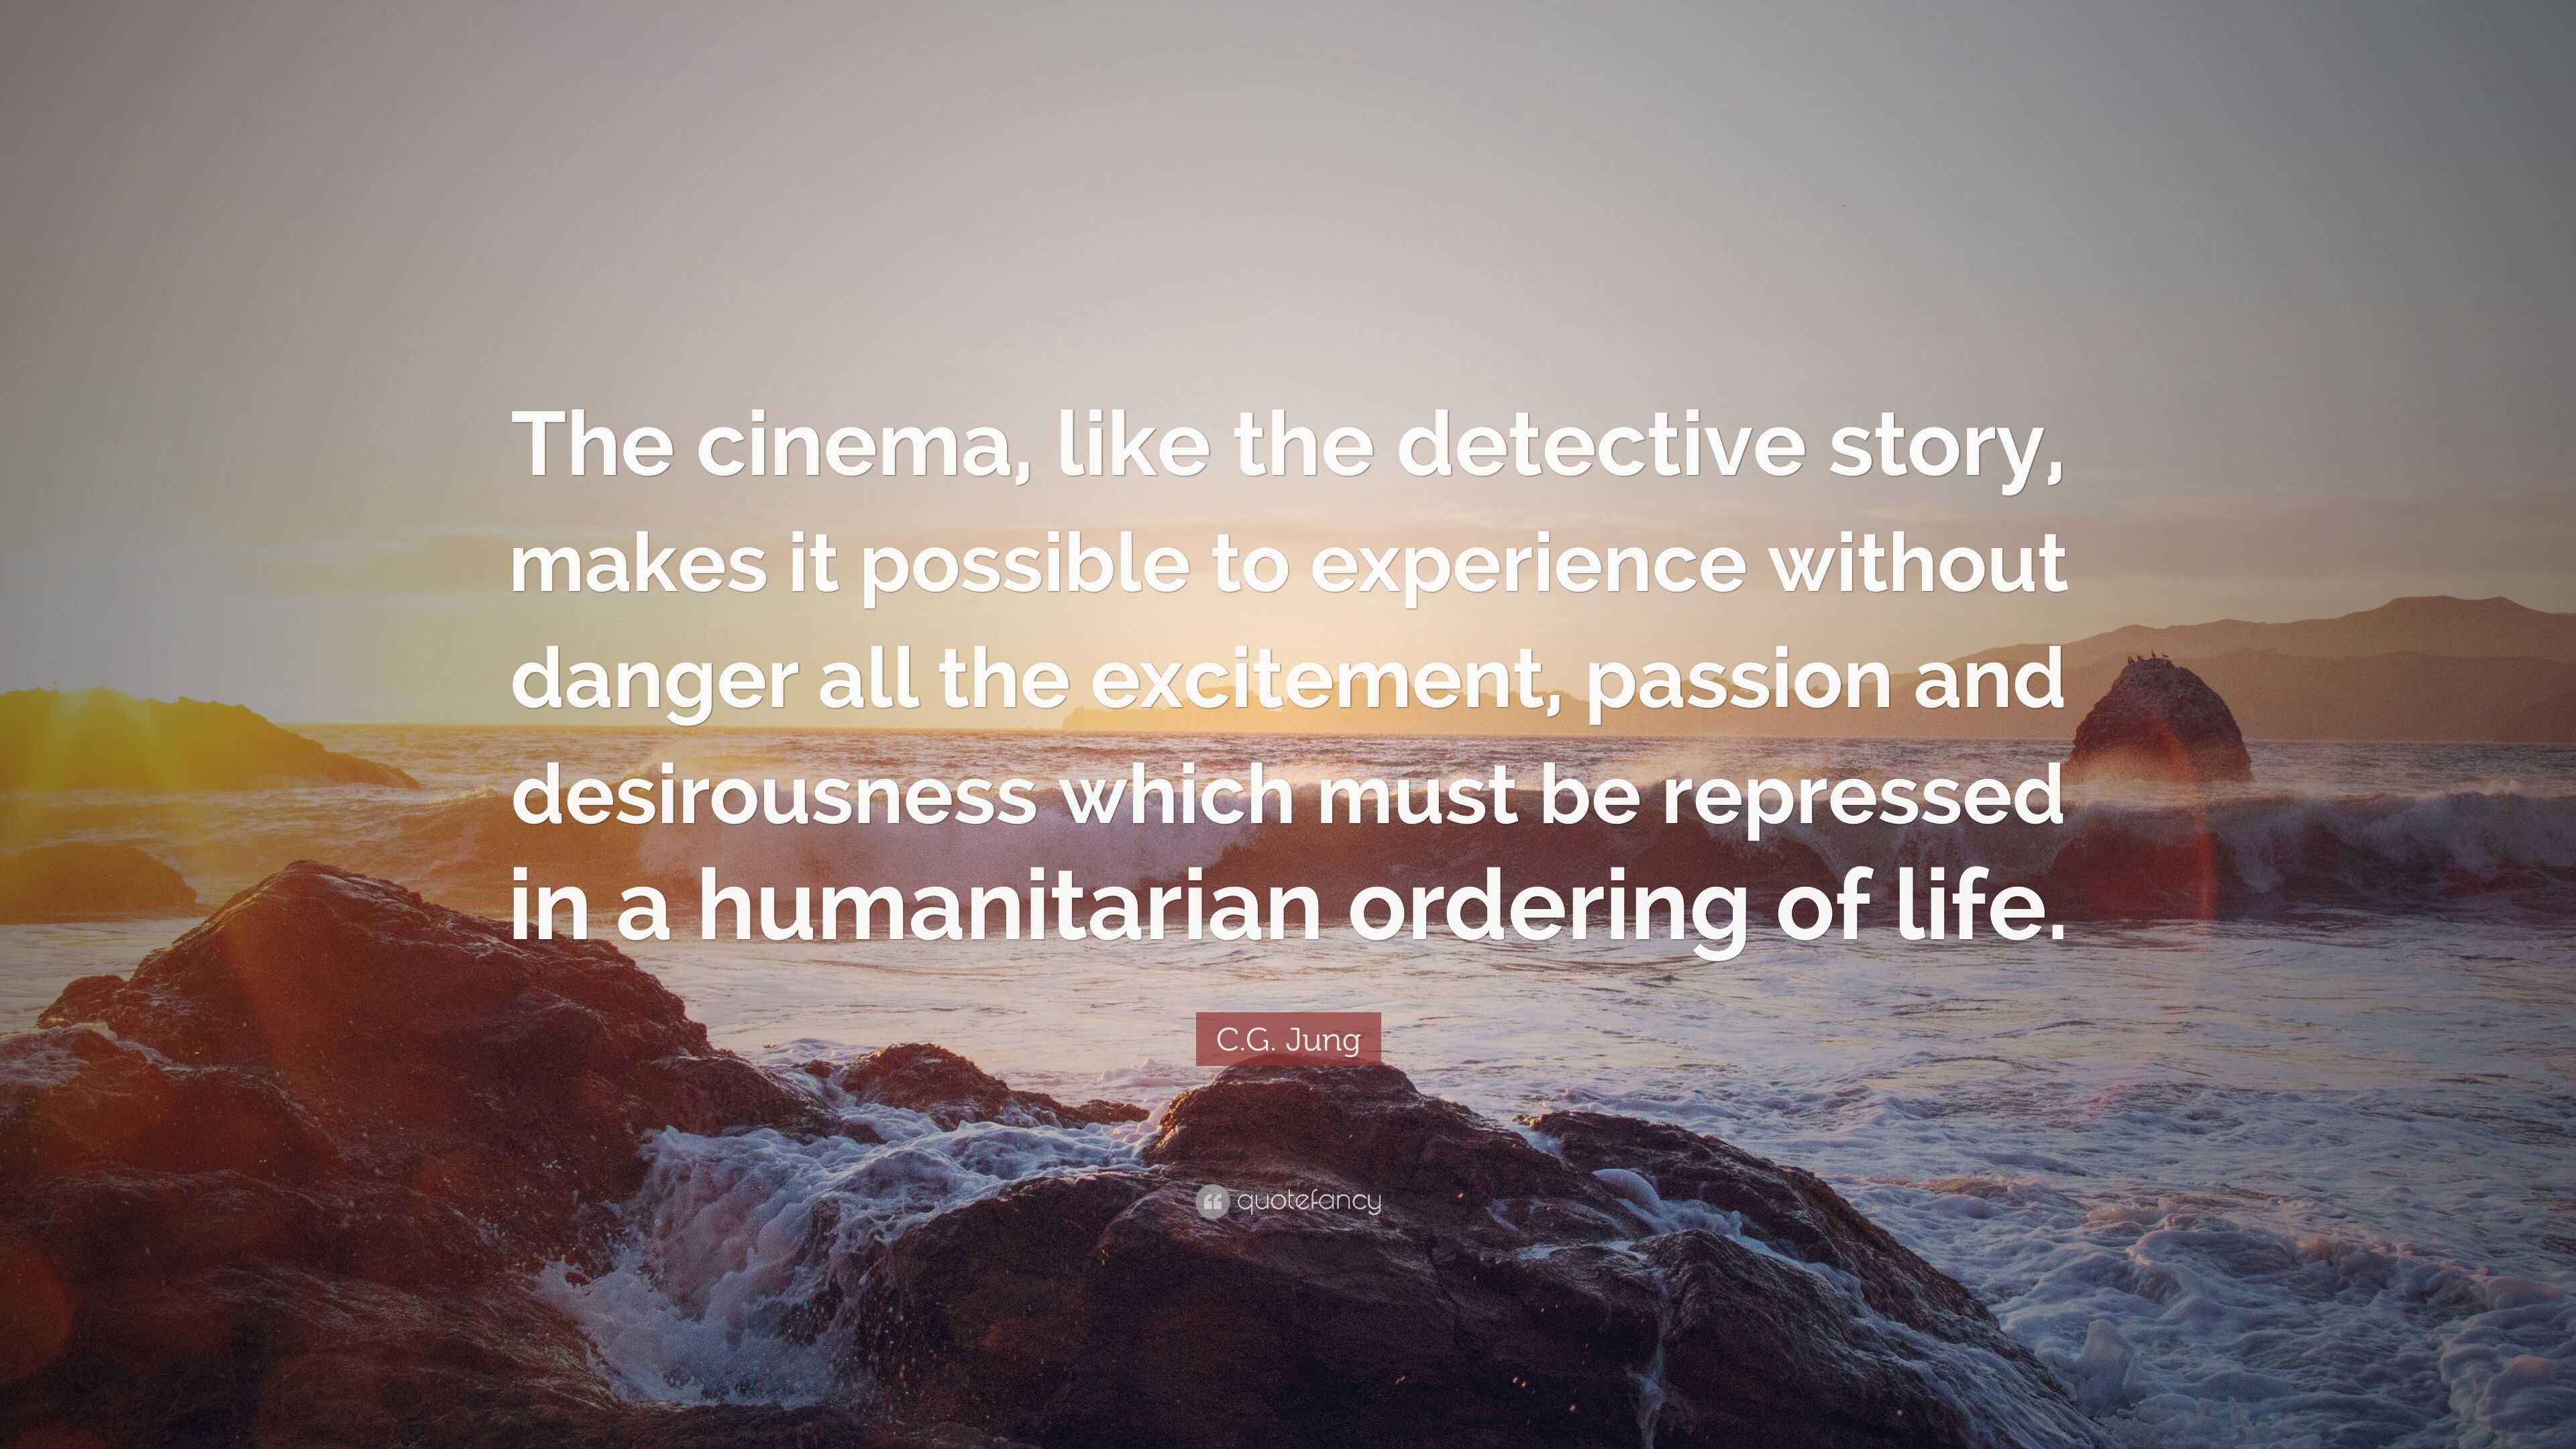 C G Jung Quote “The cinema like the detective story makes it possible